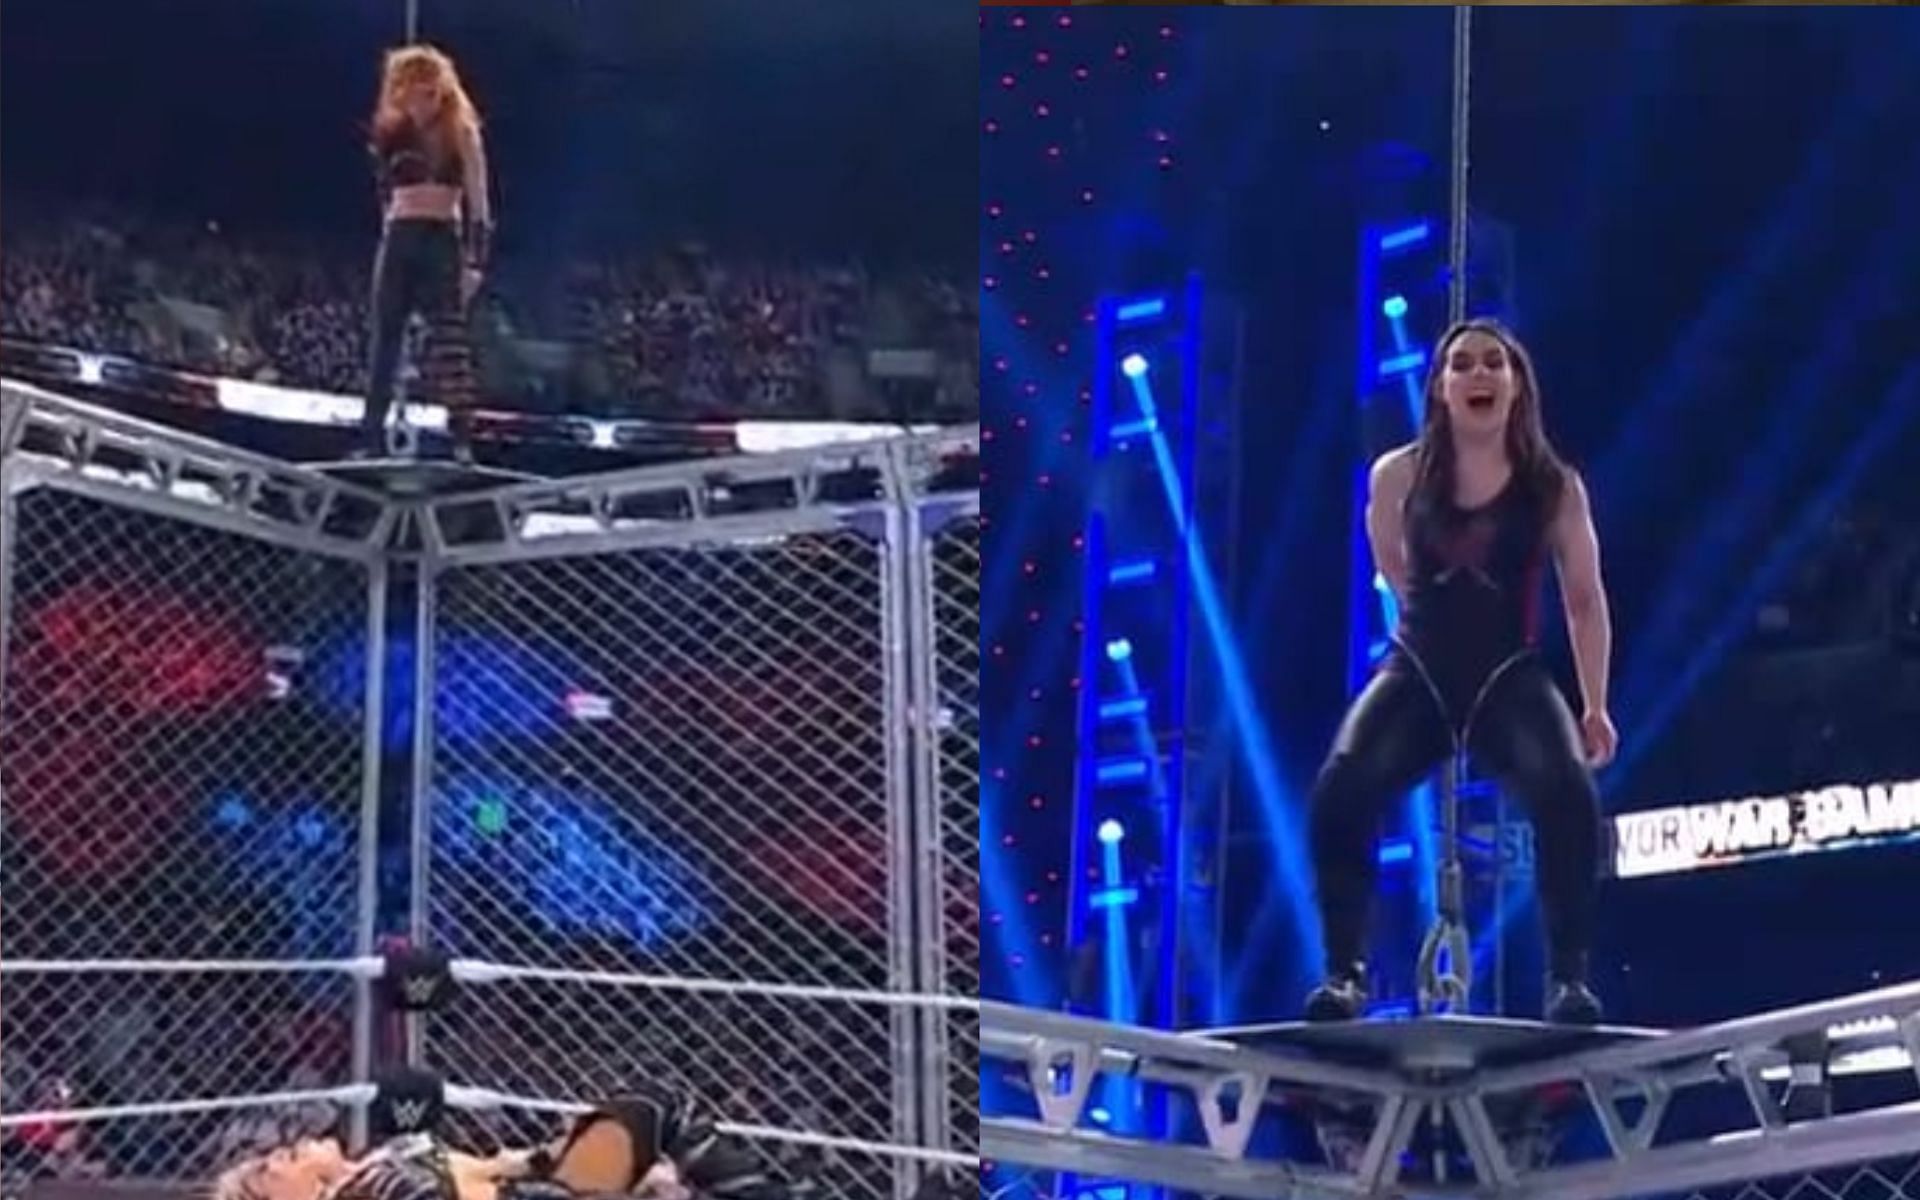 Becky Lynch picked up the victory for team EST at Survivor Series WarGames.